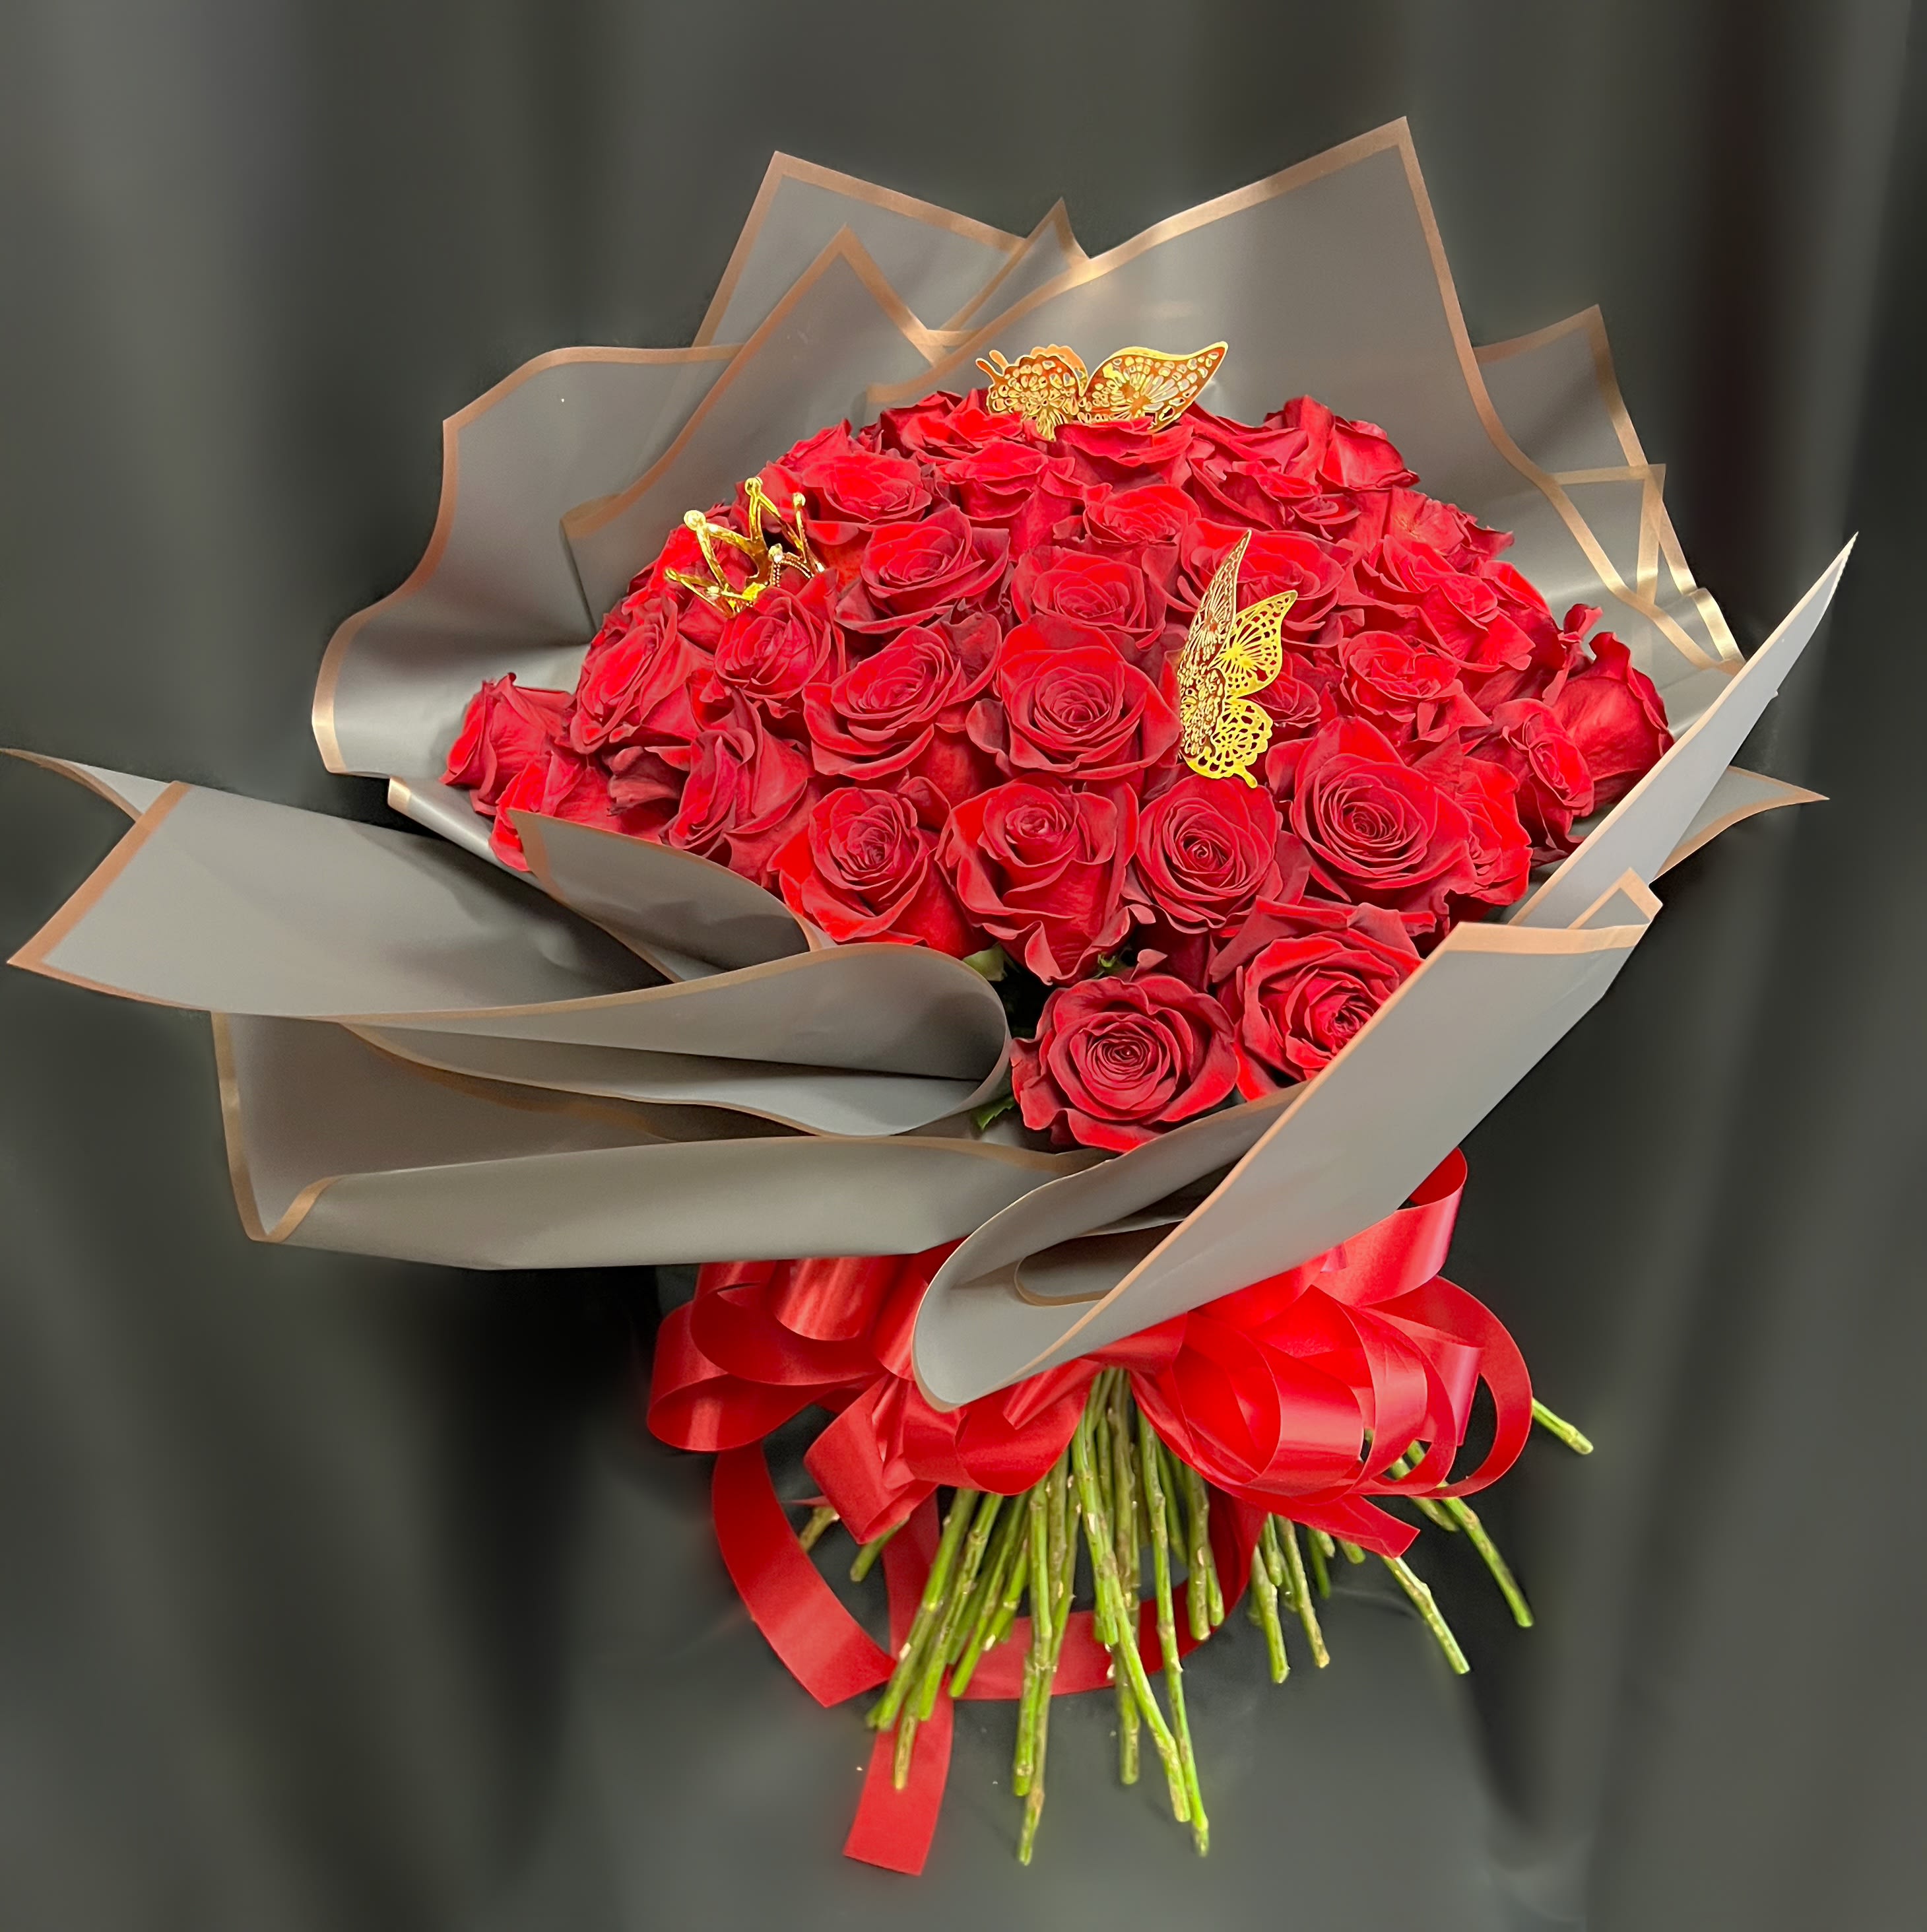 Simply spoiled  - 50 red roses wrapped in your choice of wrapped colored paper  Paper colors: Light pink, light blue, light purple, white, black and clear